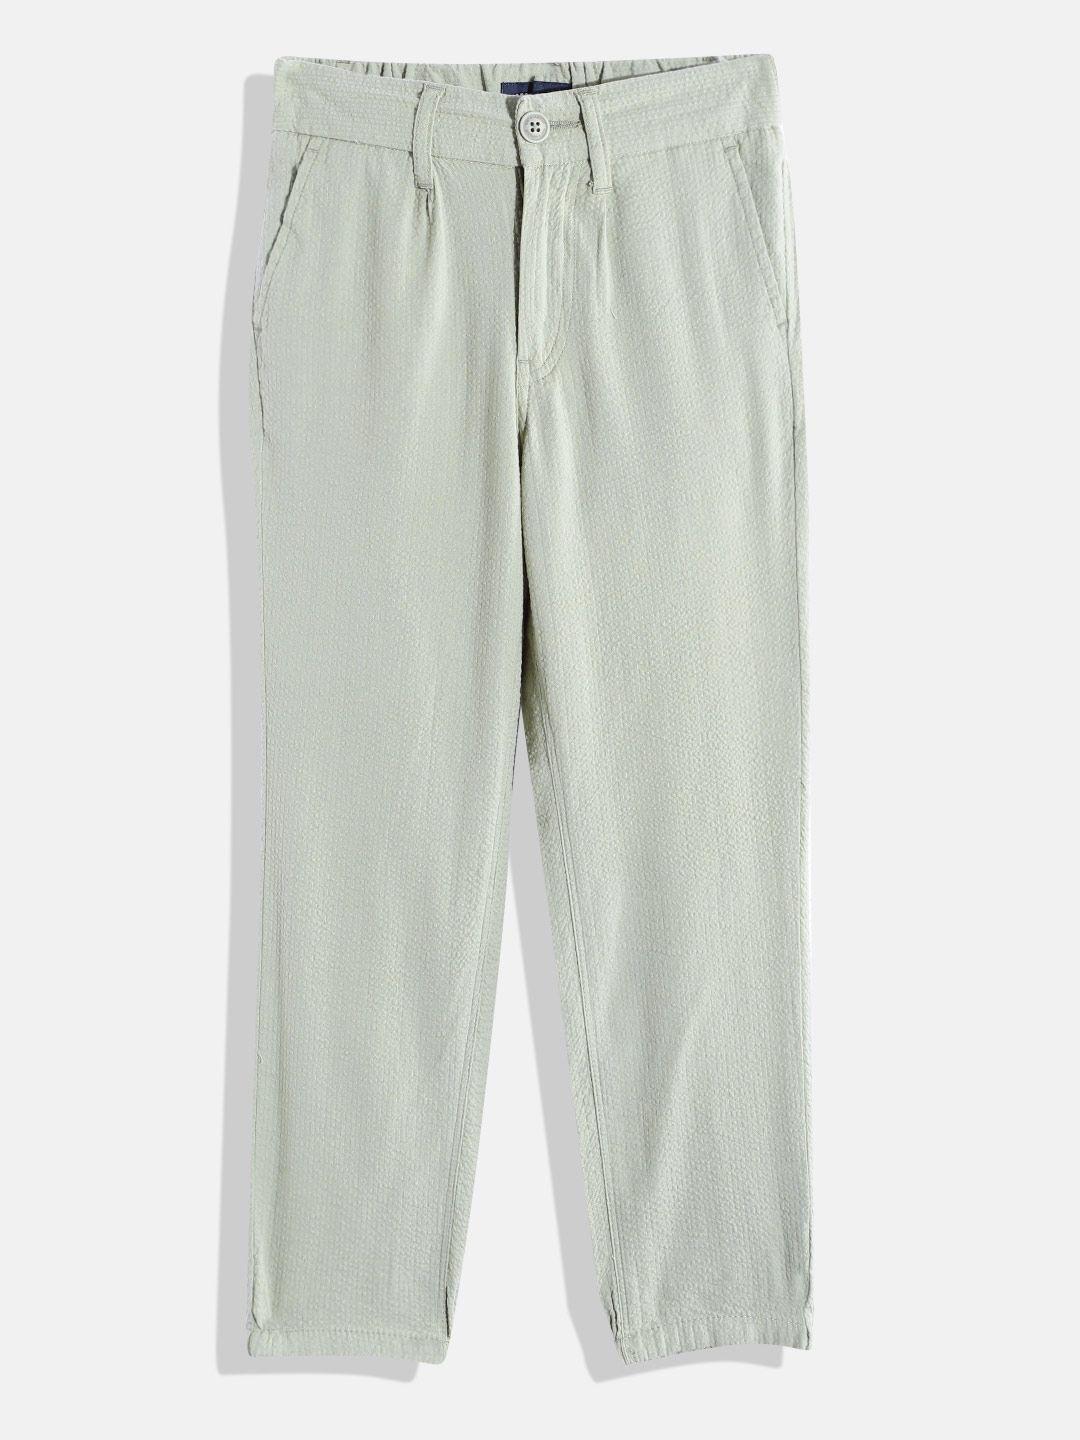 m&h juniors boys mint green pure cotton solid trousers